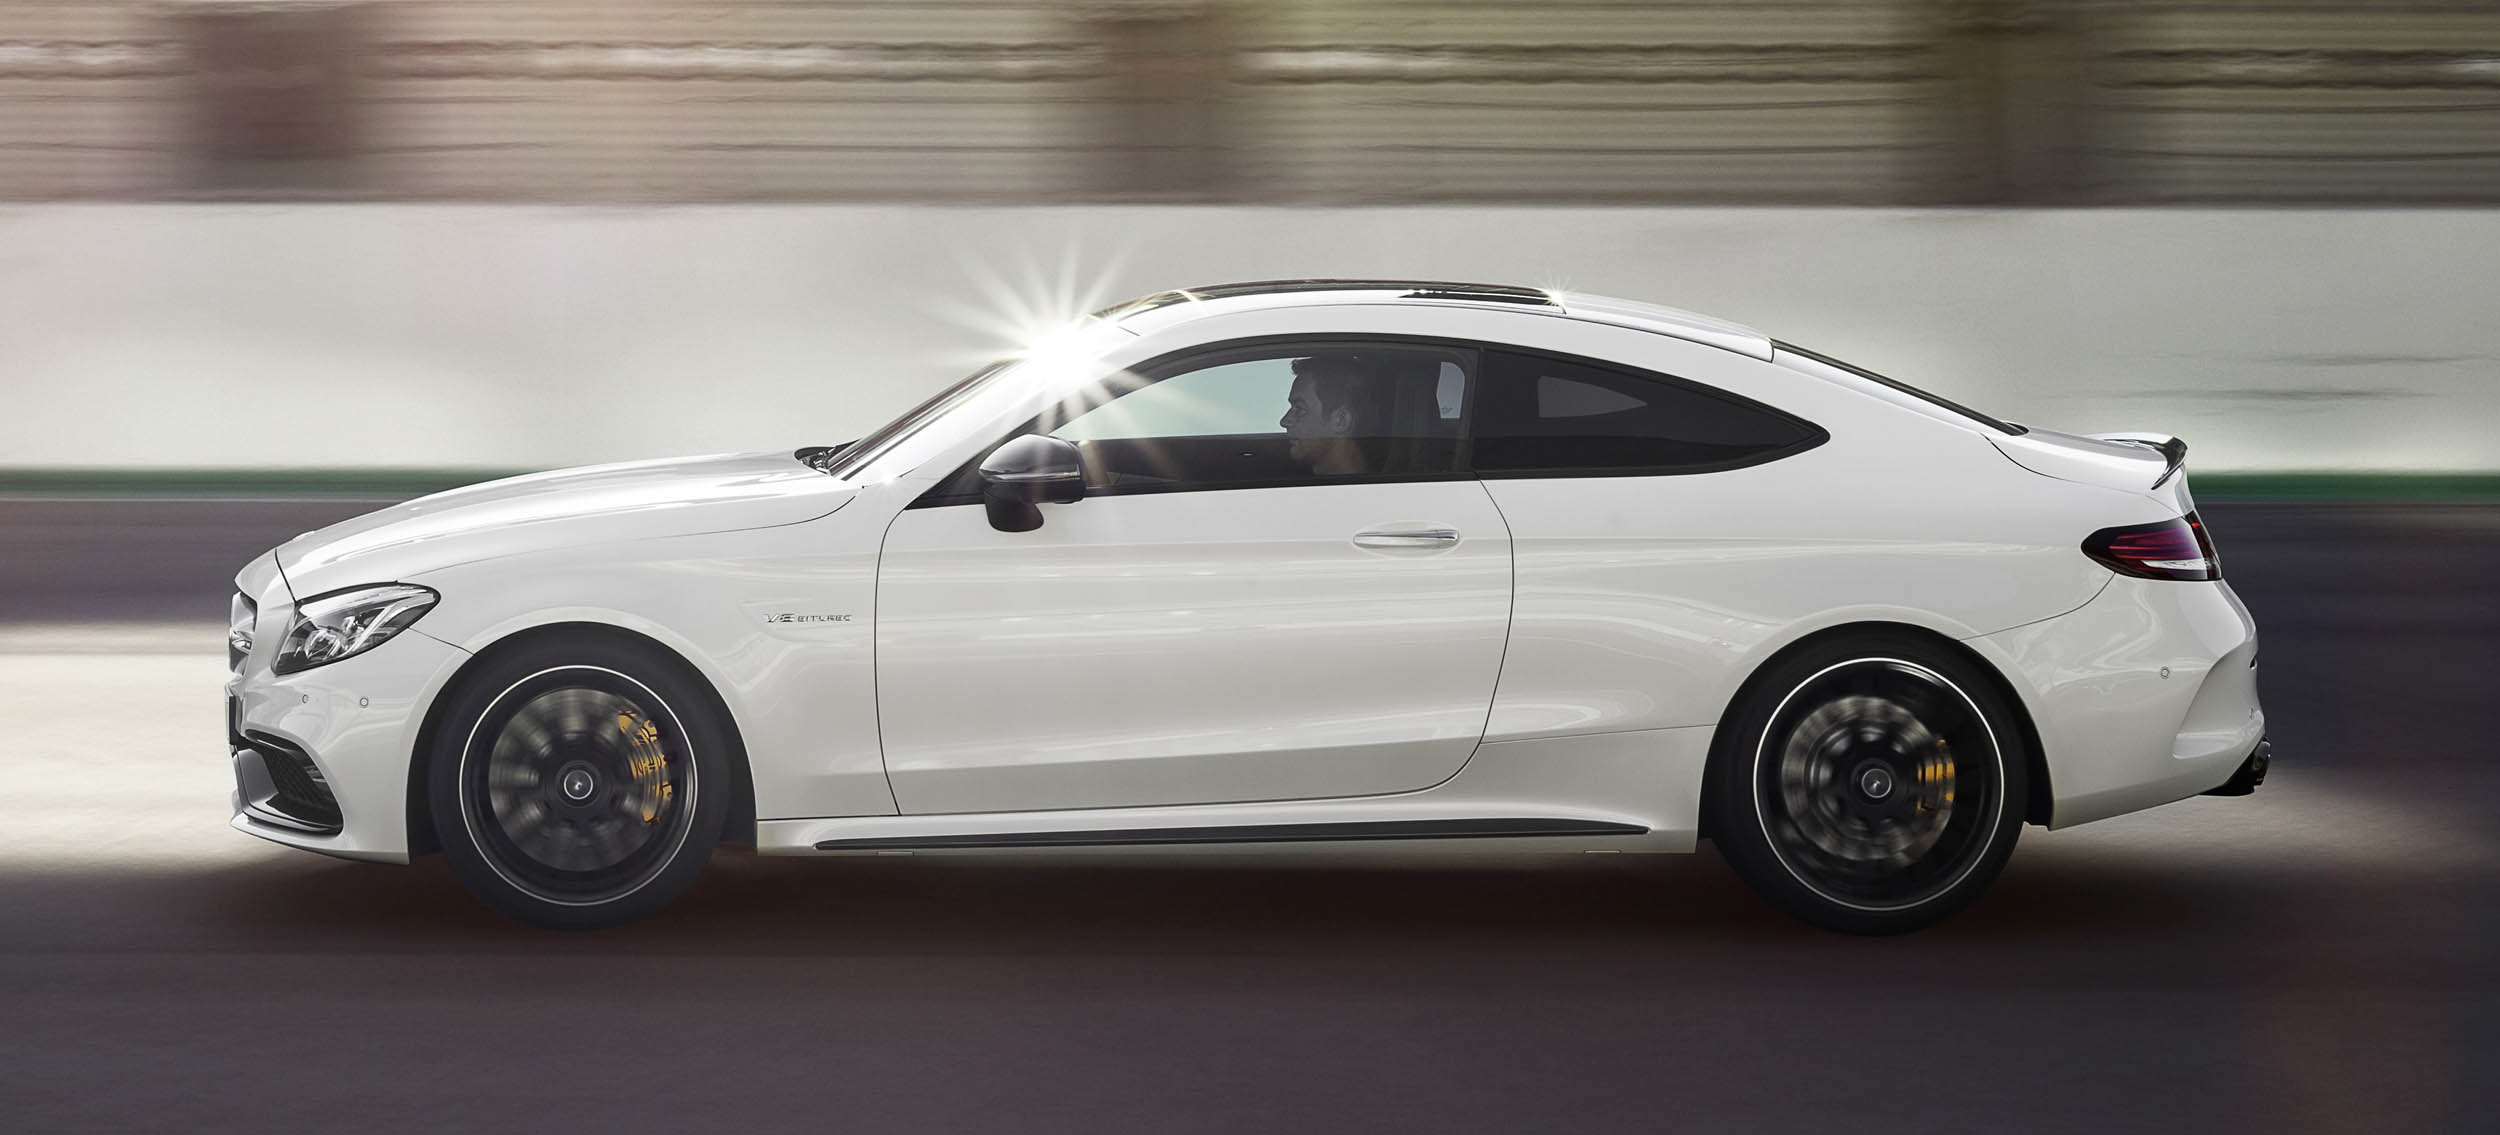 Mercedes-AMG C 63 Coupe debuts with up to 510 hp Mercedes-AMG C 63 S ...